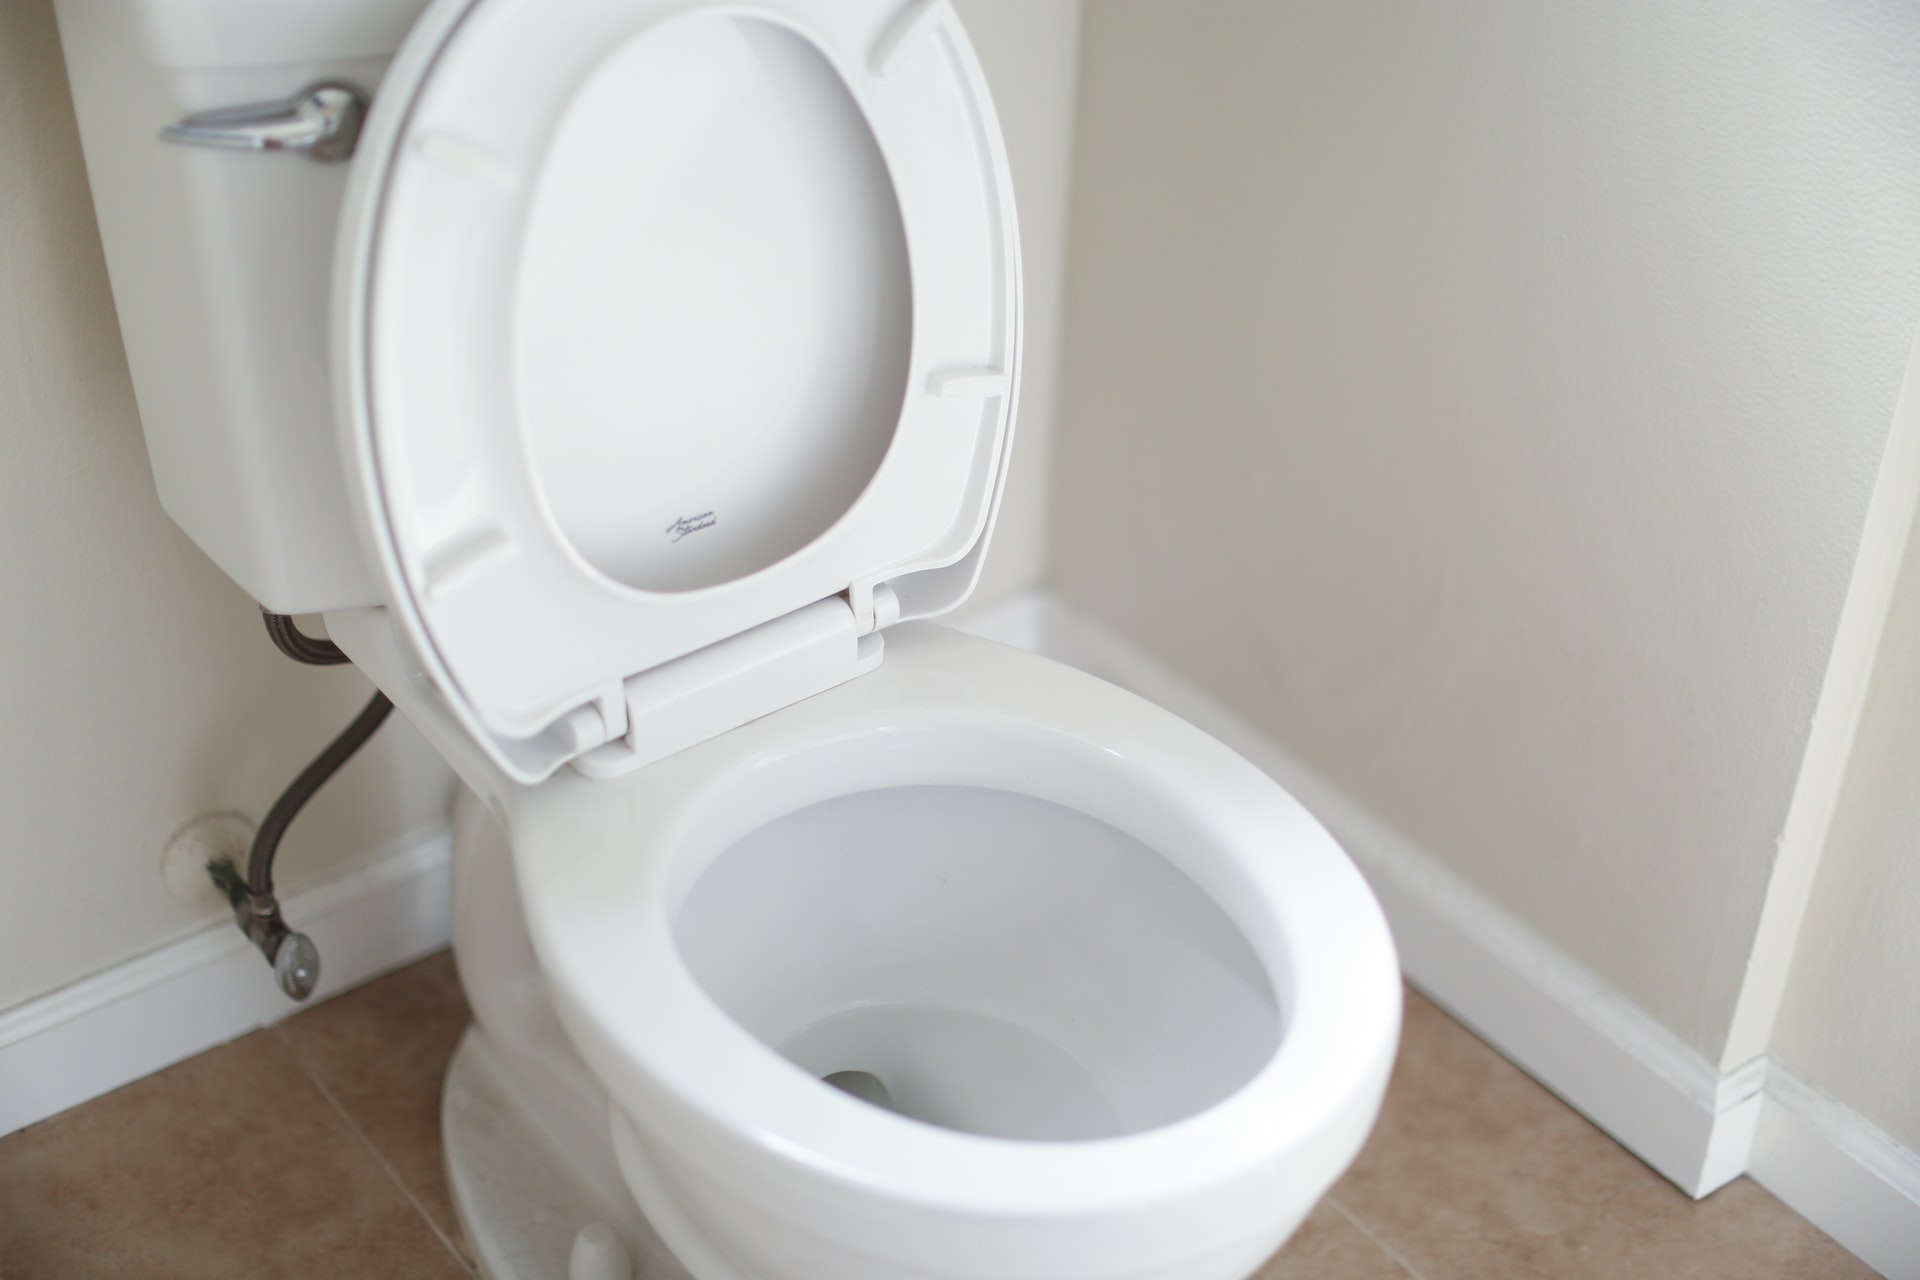 How to Unclog a Septic Tank Toilet